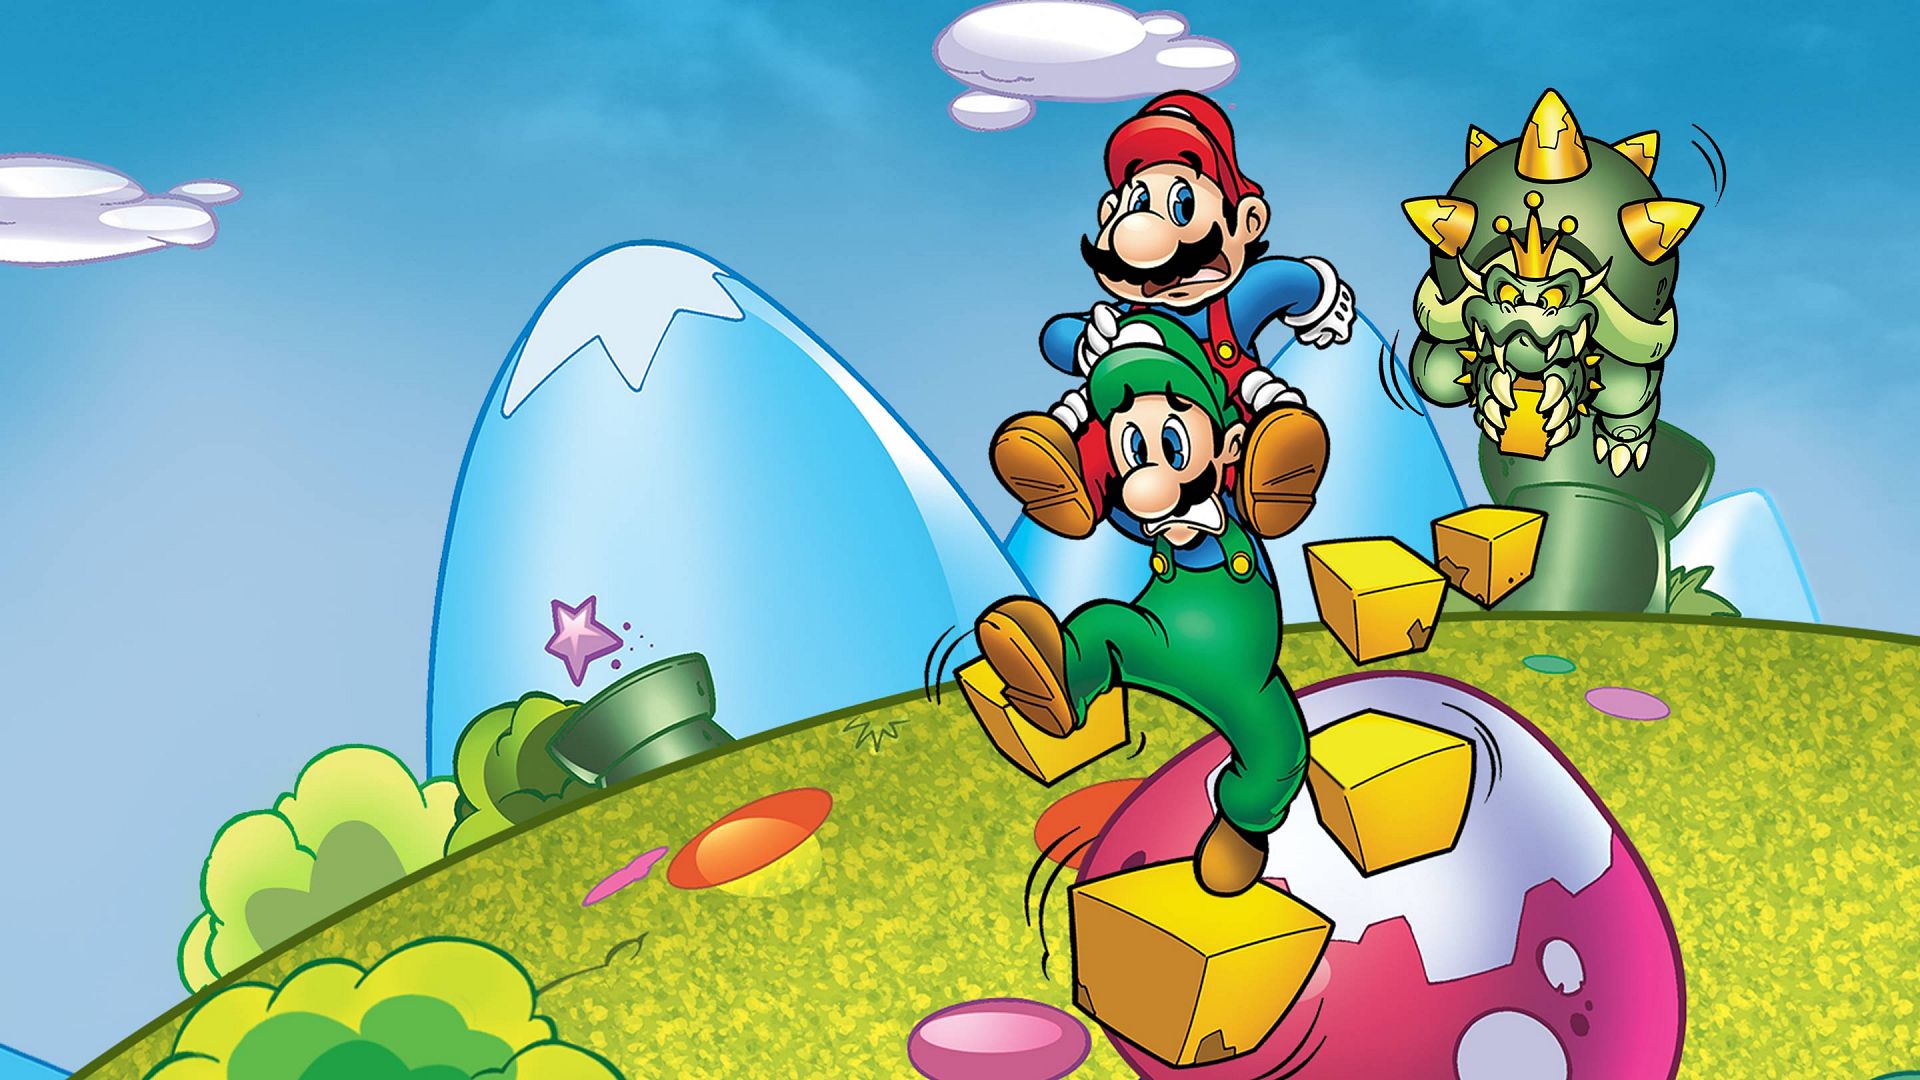 Super Mario Bros. Super Show now available on Netflix